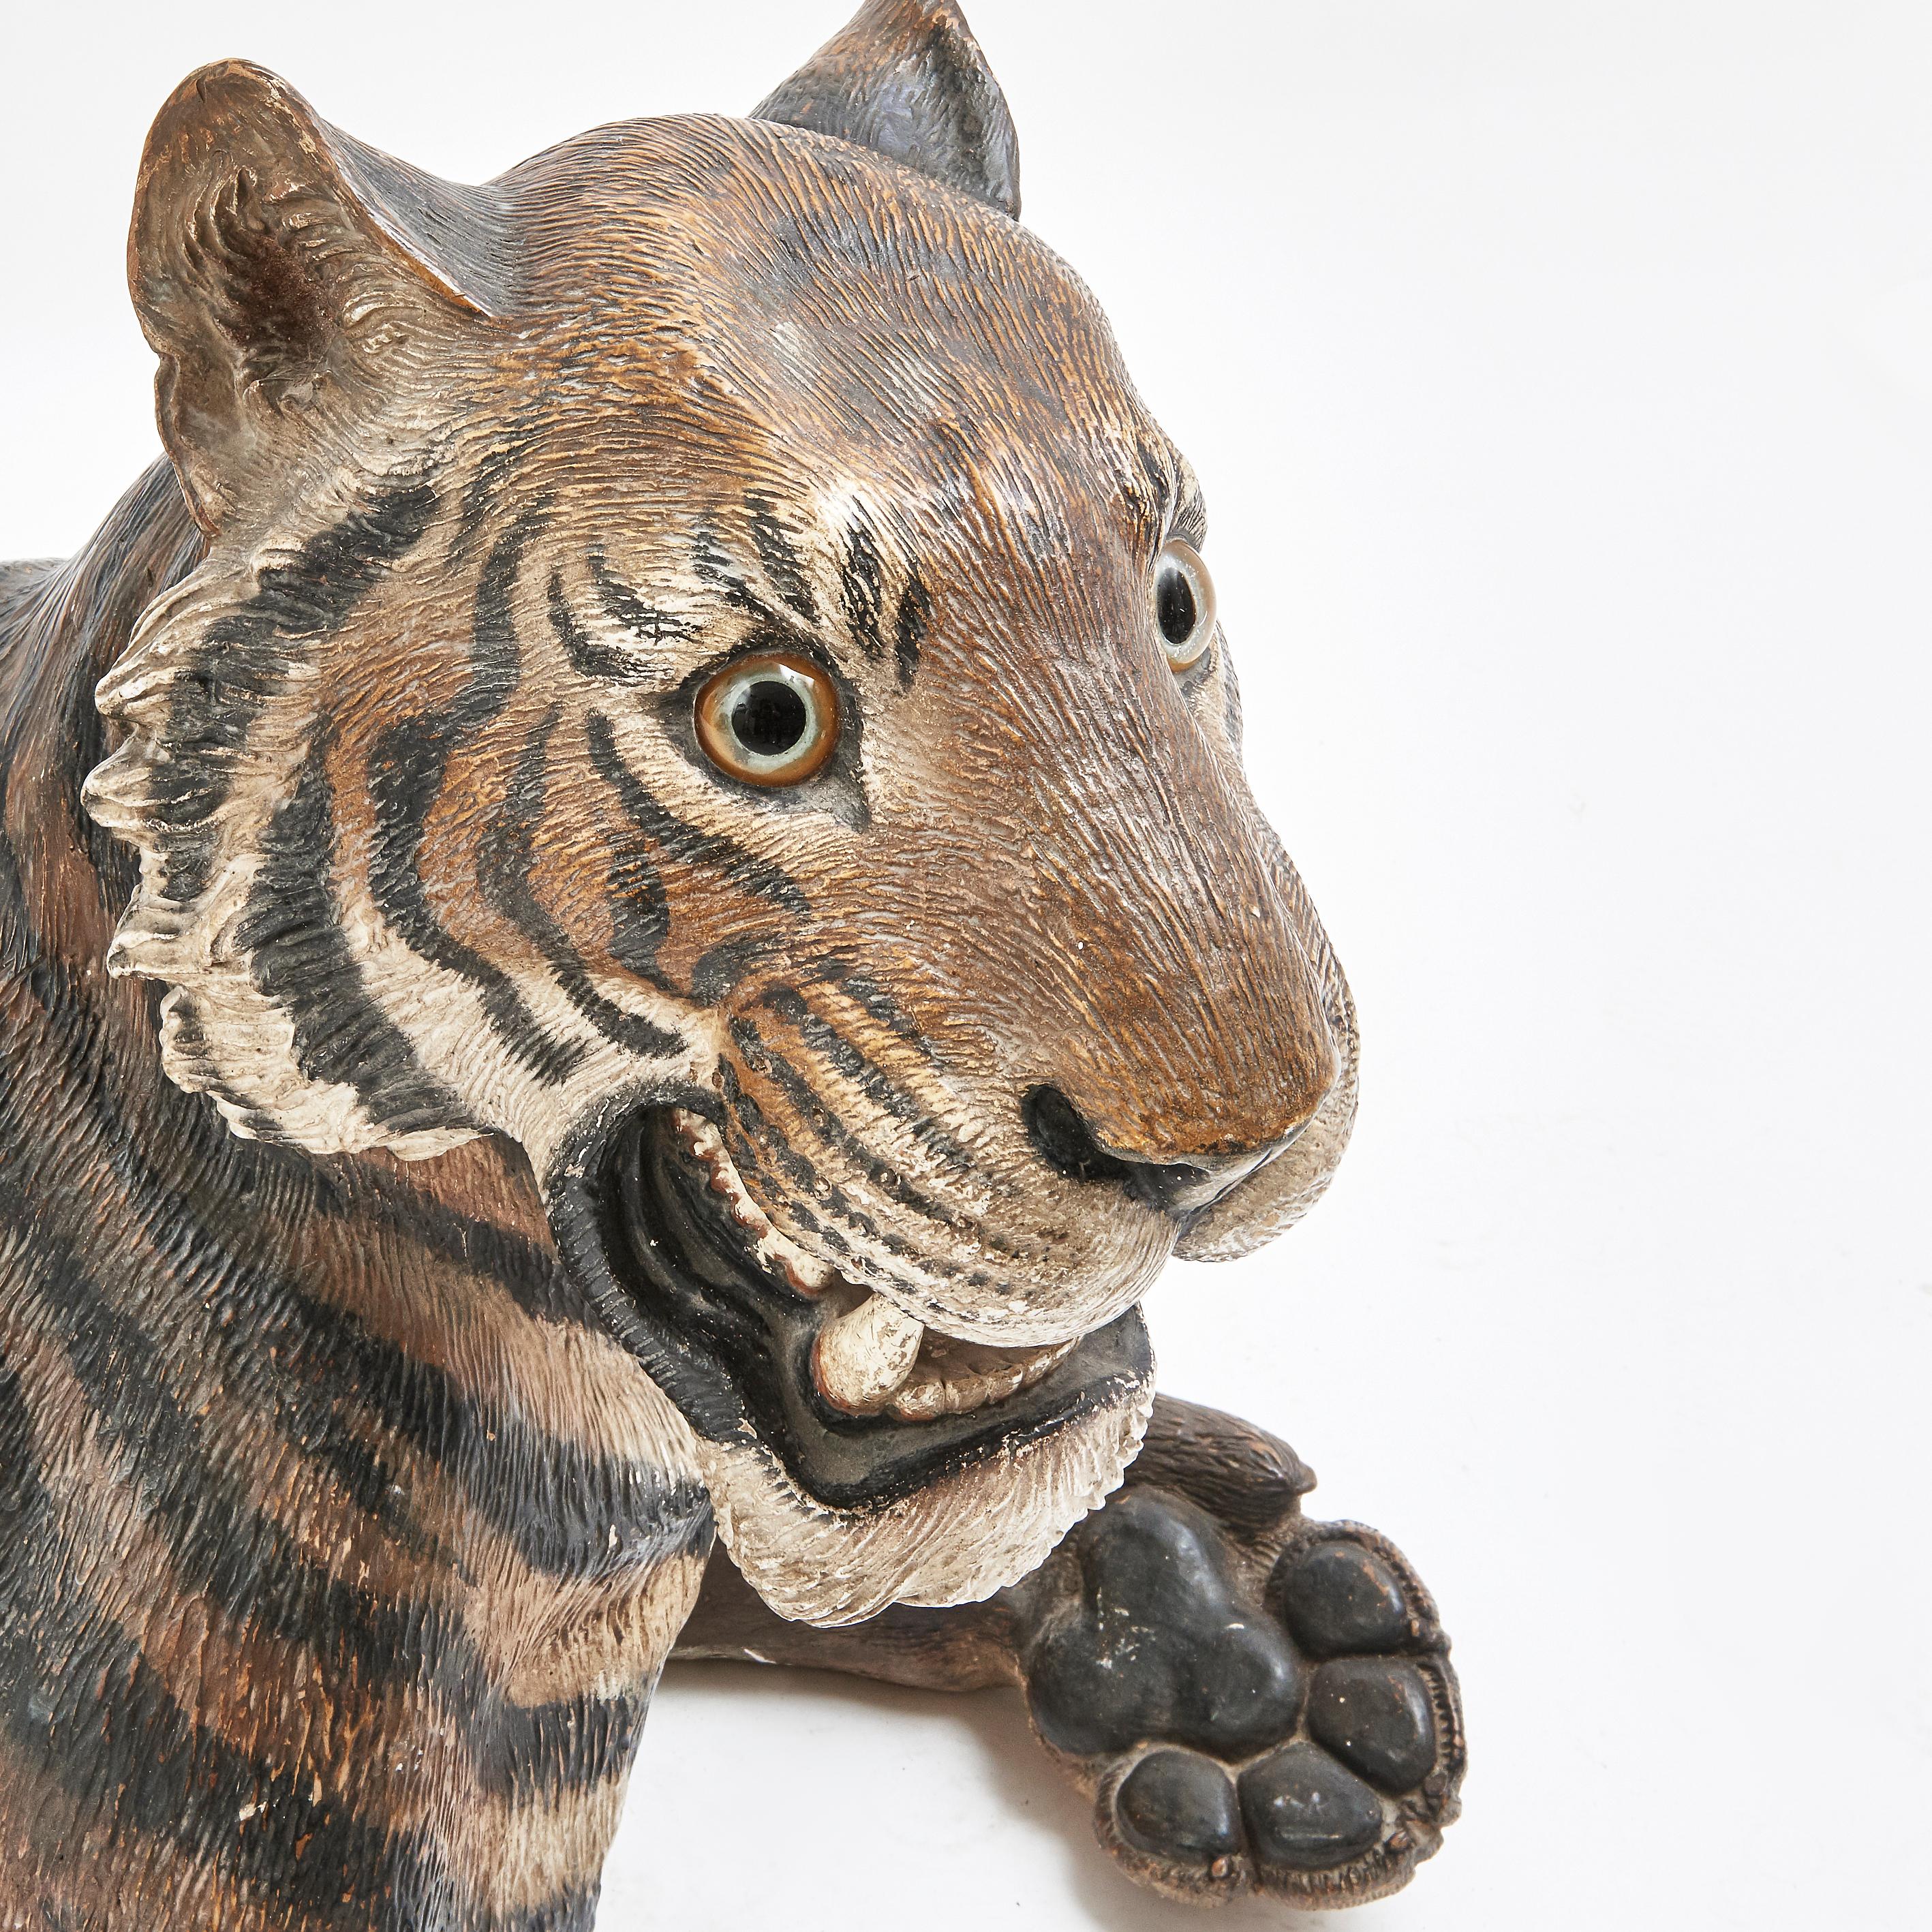 Very rare and large cold painted terracotta model of a recumbent tiger, with paws outstretched and glass eyes. Austrian, late 19th century, old repairs. His coat in traditional tiger colours of deep amber and black stripes, mouth open bearing his